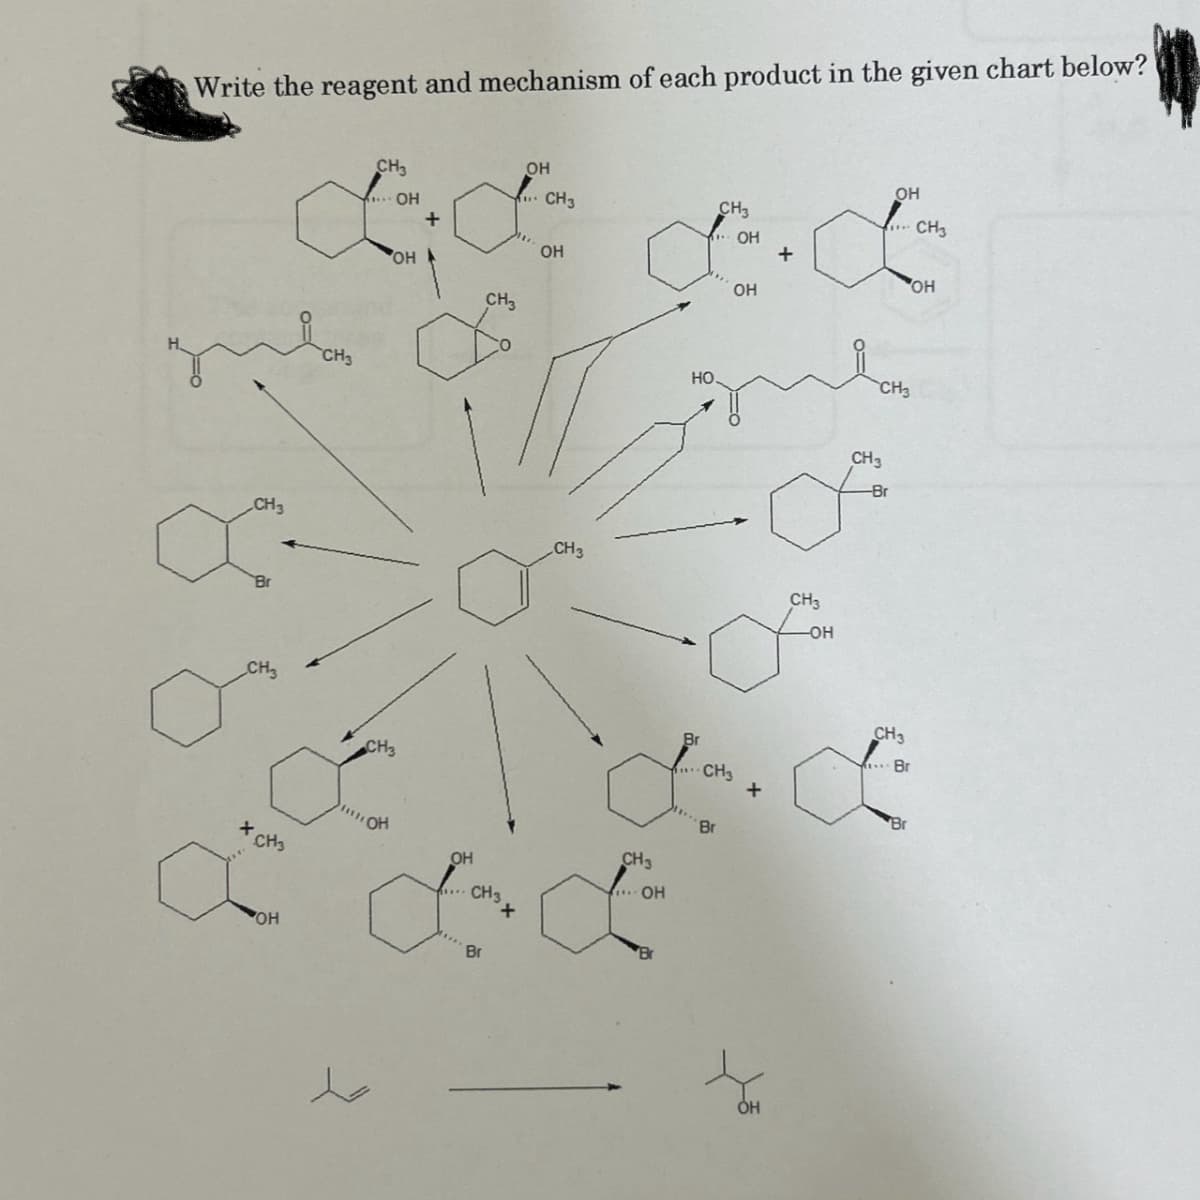 Write the reagent and mechanism of each product in the given chart below?
CH3
х
X CH3
OH
CH3
4.... OH
OH
CH3
он
+
OH
а
ОН
d
CH3
CH3
Br
...CH3
OH
CH 3
CH3
.... OH
НО.
Br
CH3
Br
ОН
ОН
CH3
CH3
риво
CH3
+
+
OH
CH3
-OH
ОН
-Br
CH3
OH
Br
Br
CH3